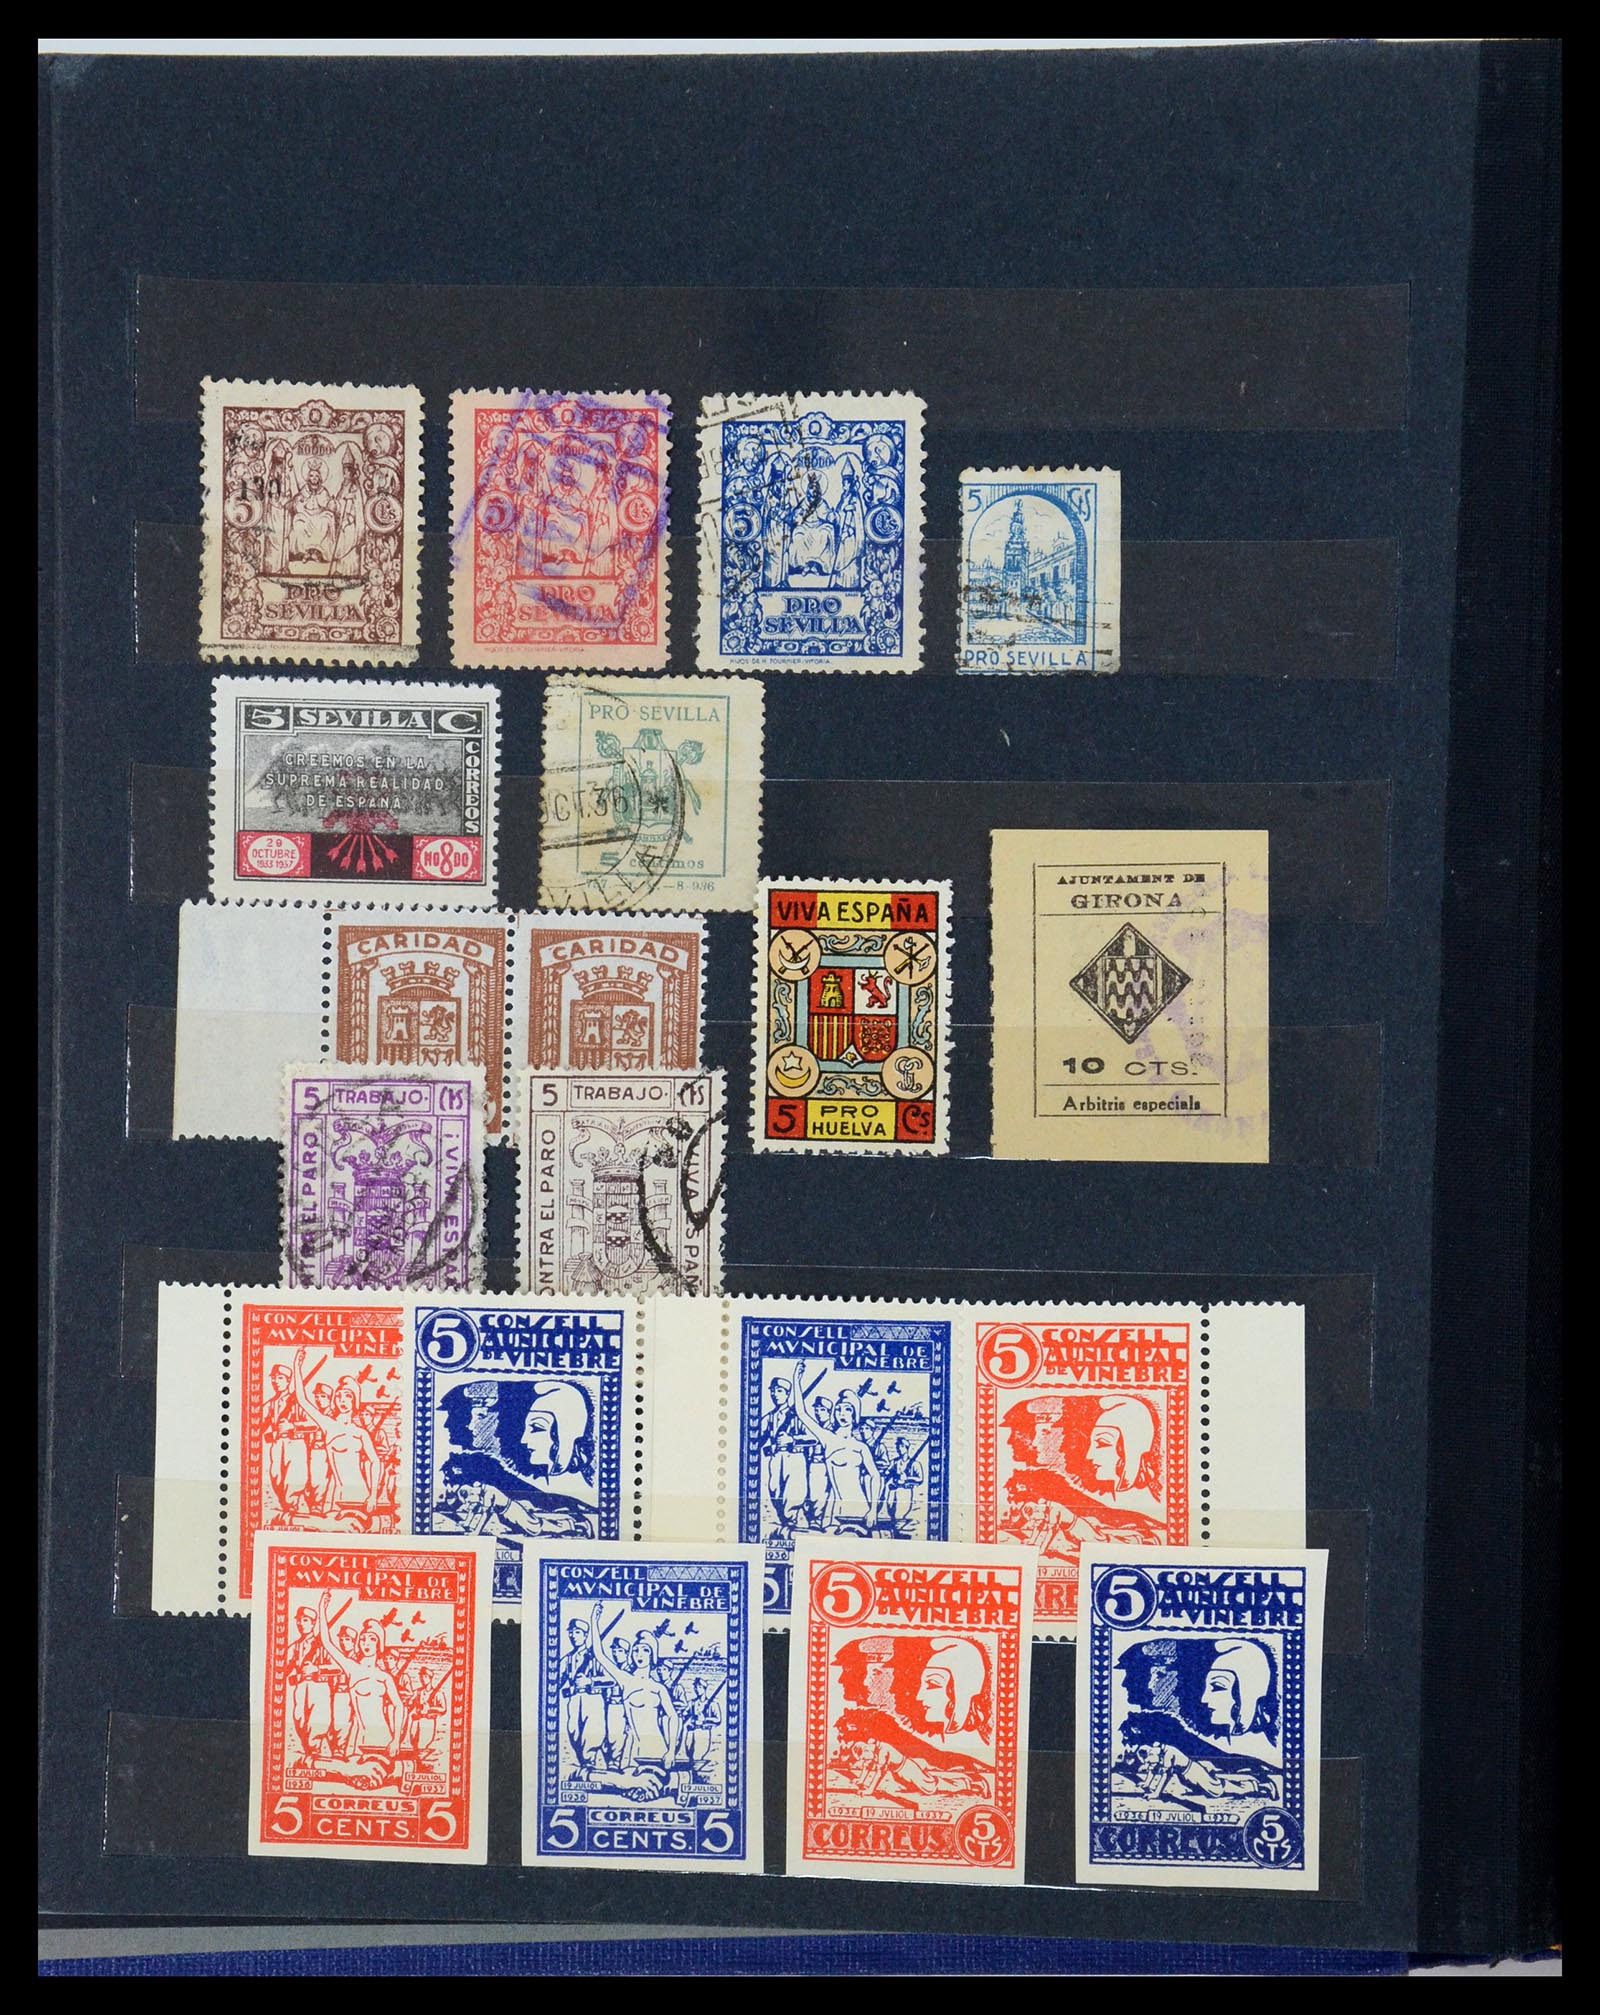 35824 011 - Stamp Collection 35824 Spanish civil war and local issues 1936-1937.